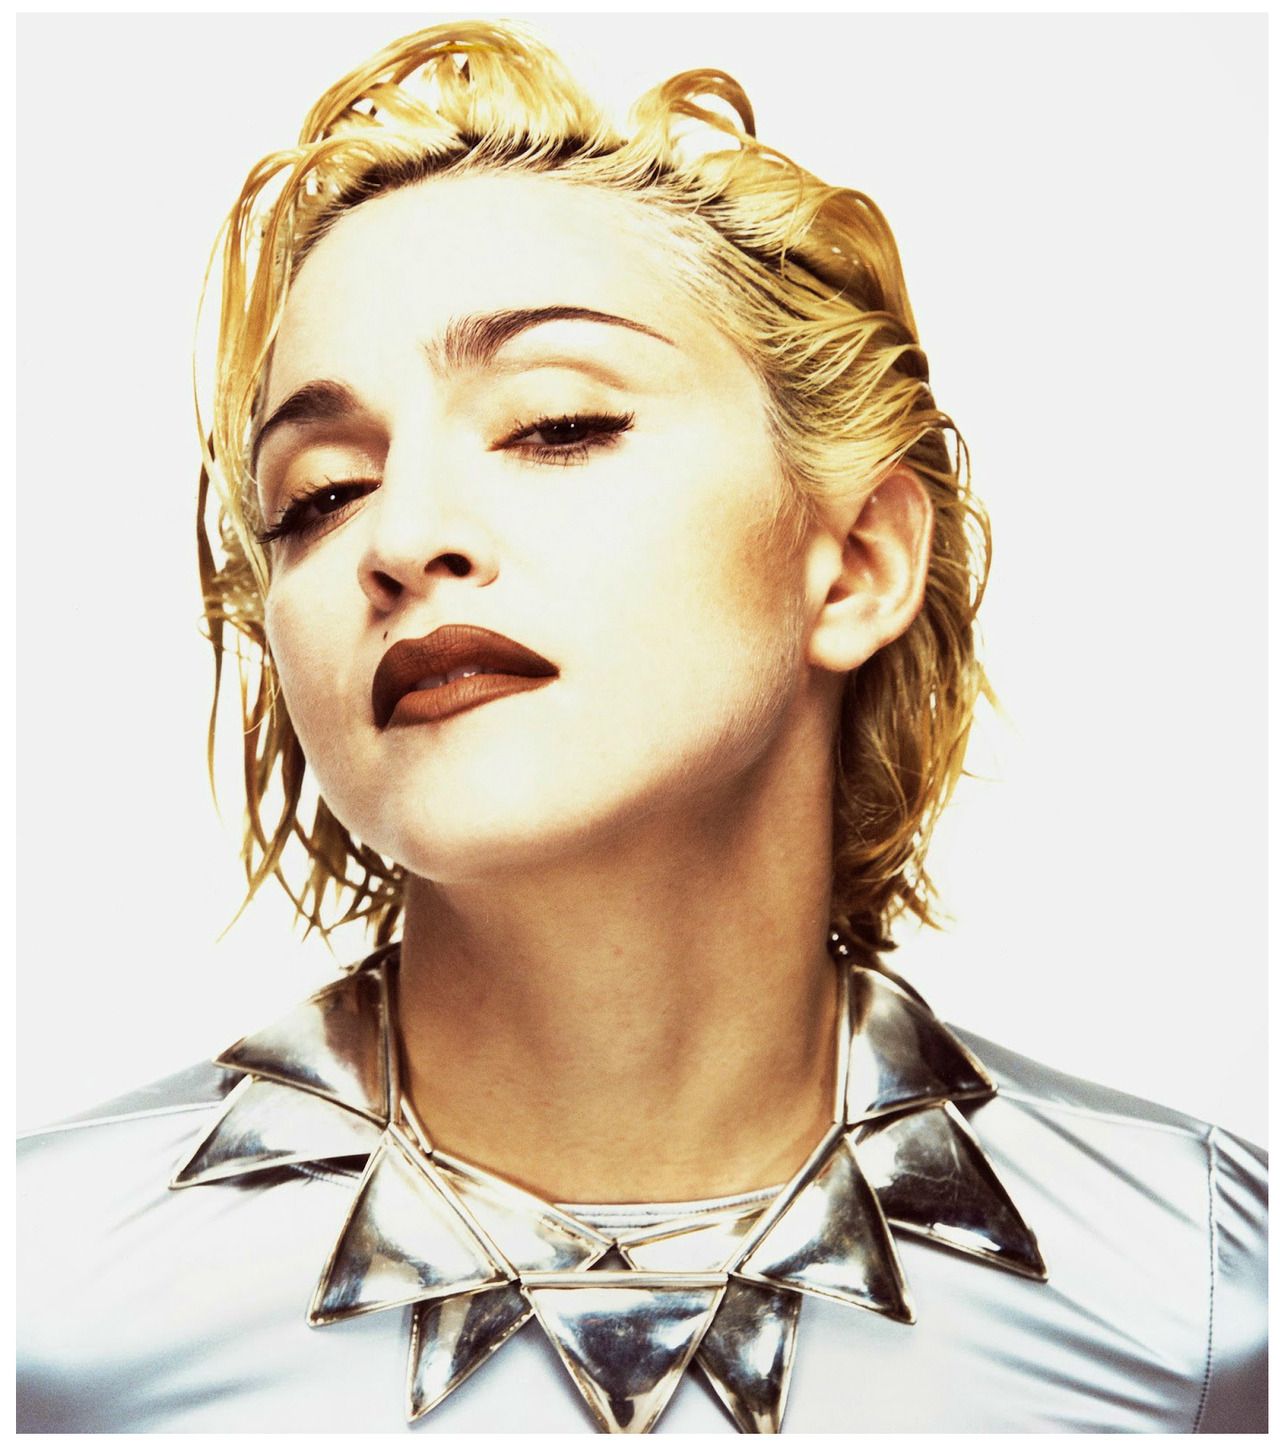 Madonna Scrapbook on X: Madonna photographed by Jean-Baptiste Mondino in  1990 for Harpers Bazaar.  / X